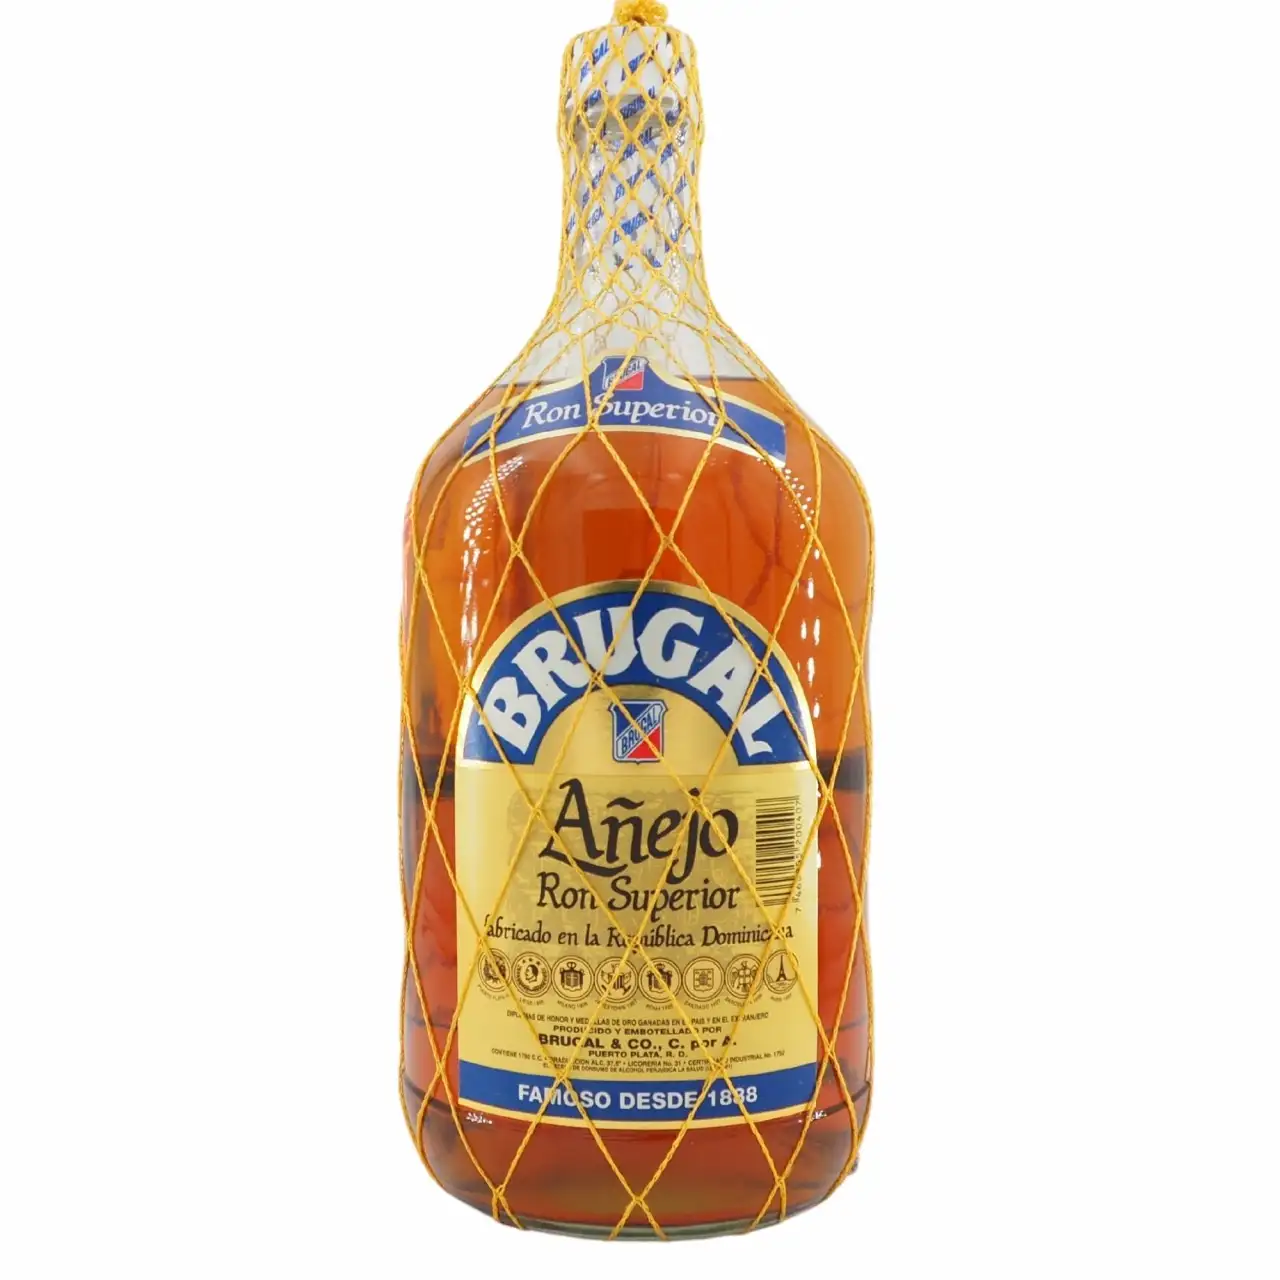 Image of the front of the bottle of the rum Anejo Ron Superior